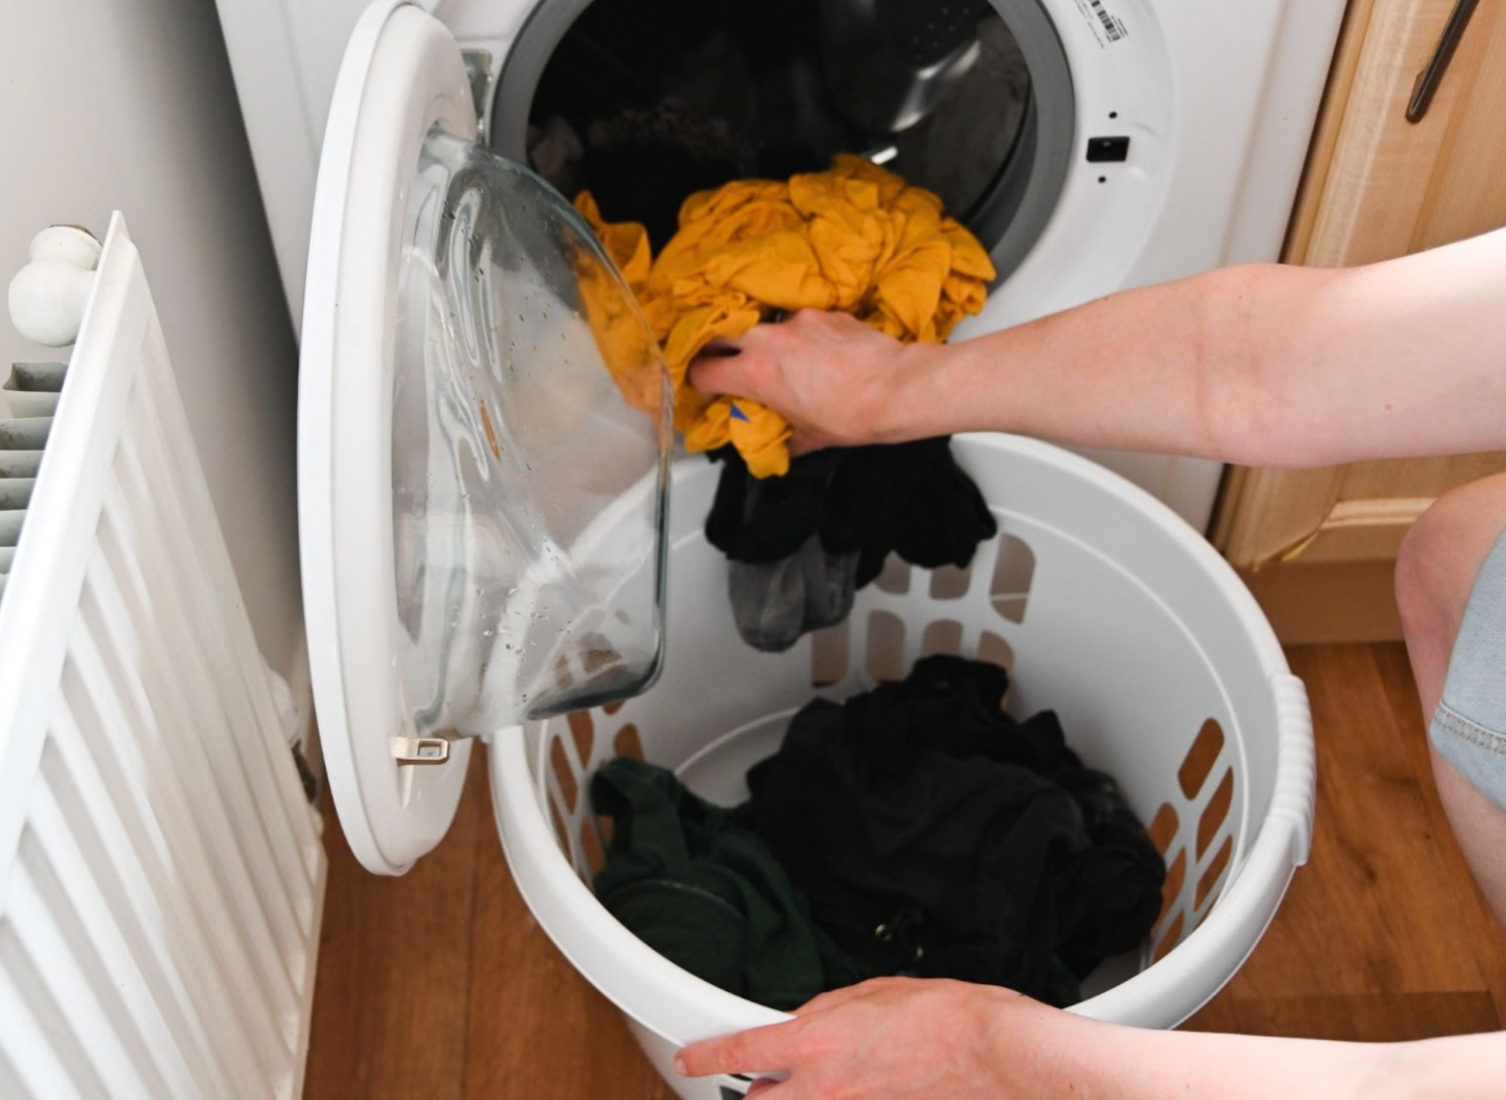 Clothes being emptied from a washing machine